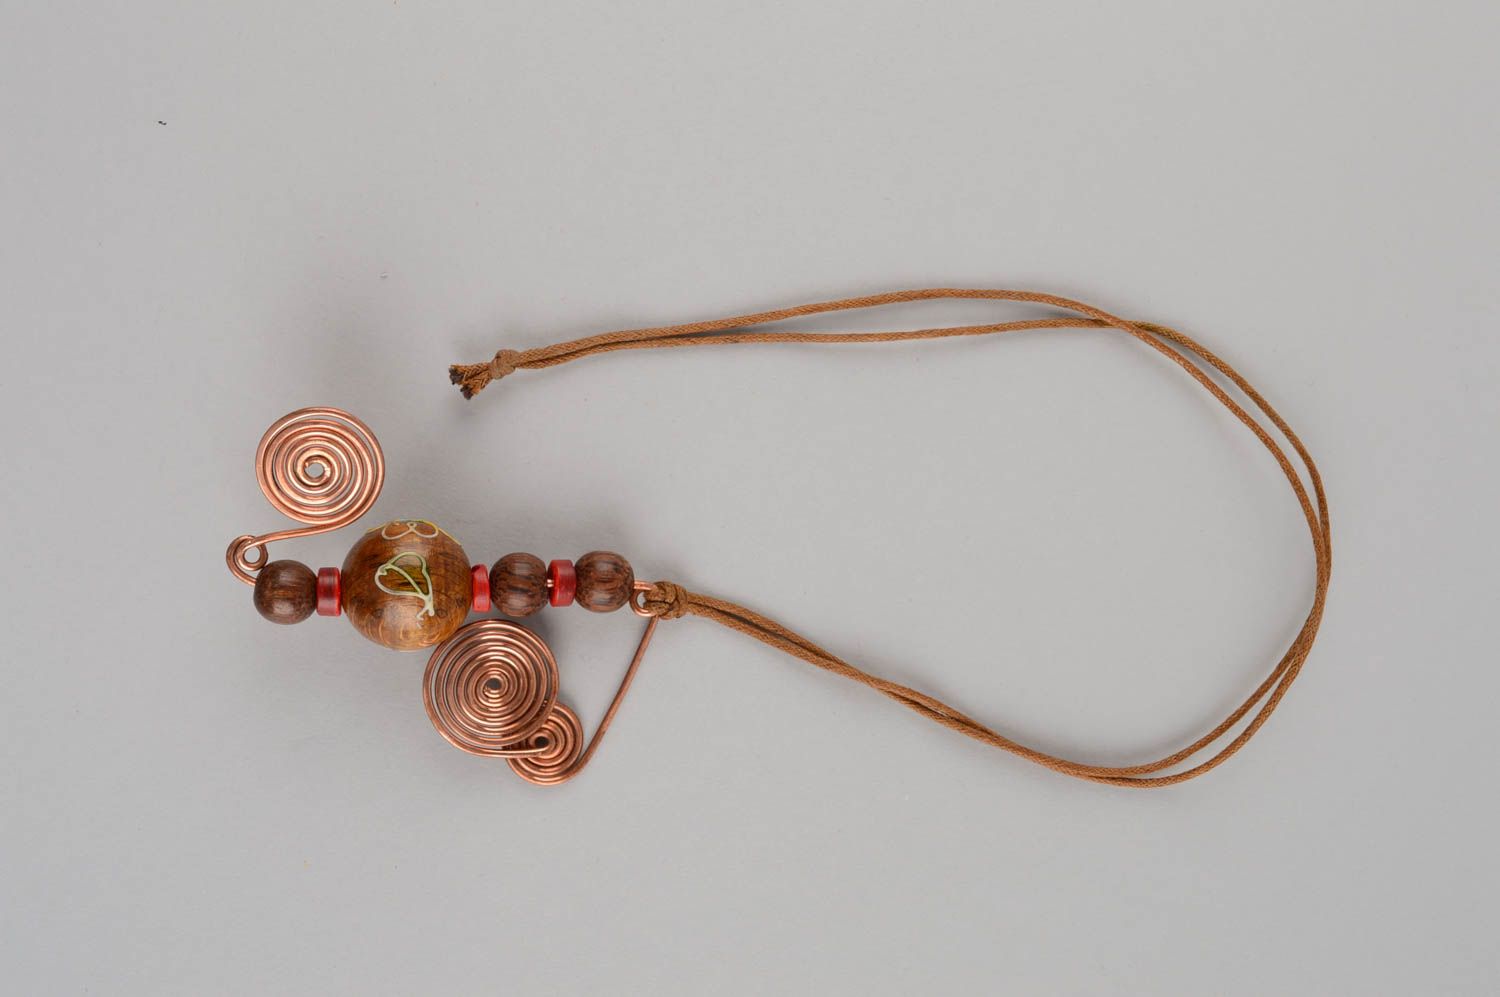 Handmade designer copper wire pendant with wooden beads on cord women accessory photo 2